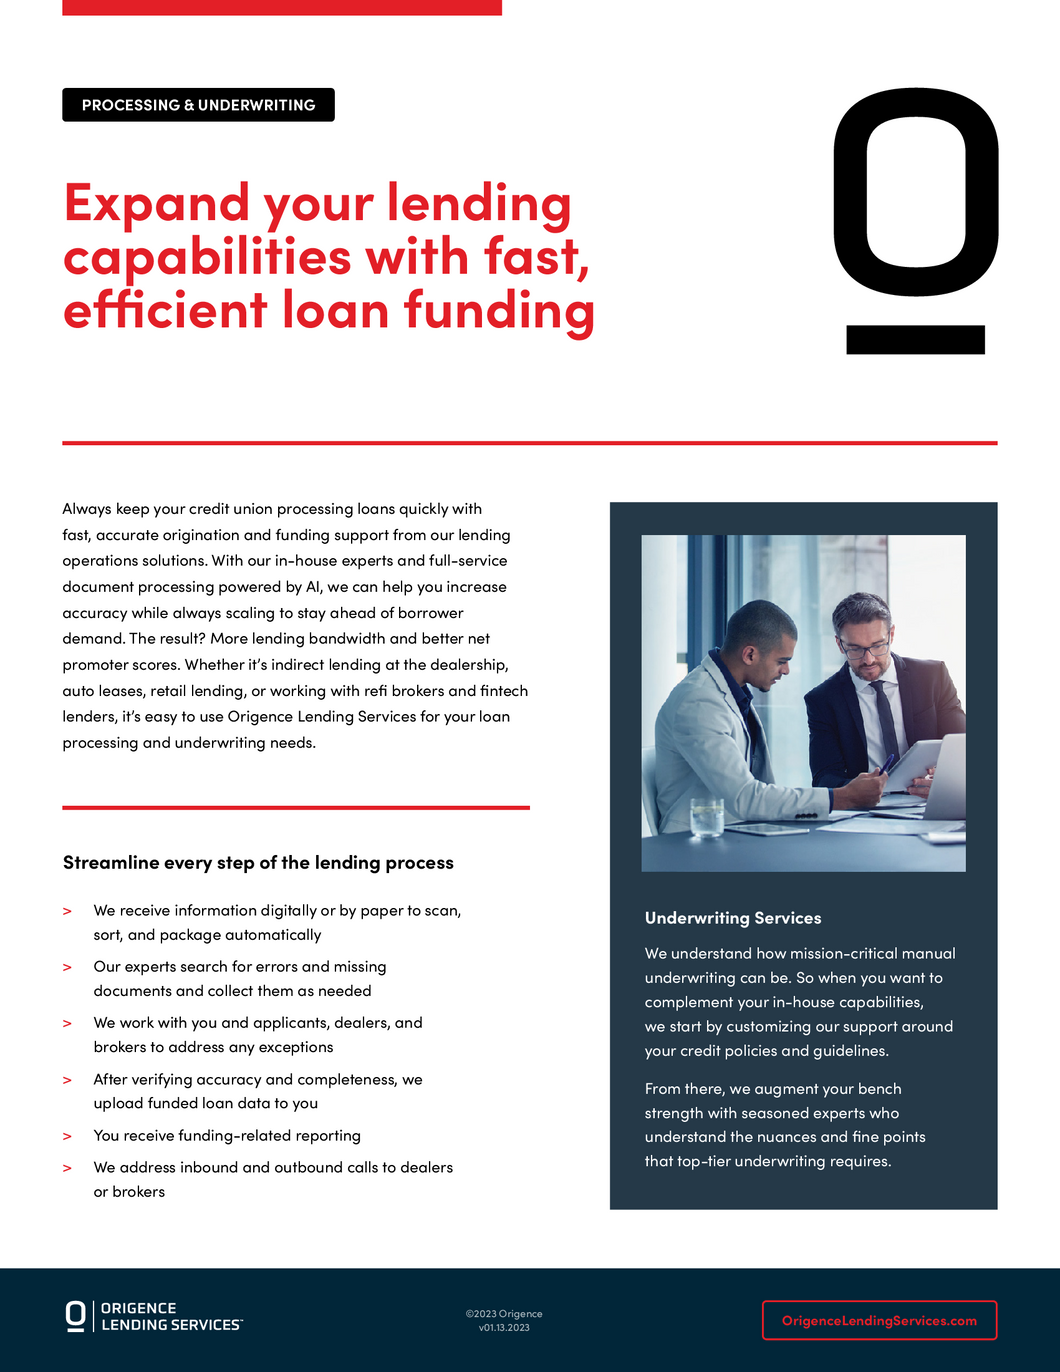 Origence Lending Services | Processing & Underwriting